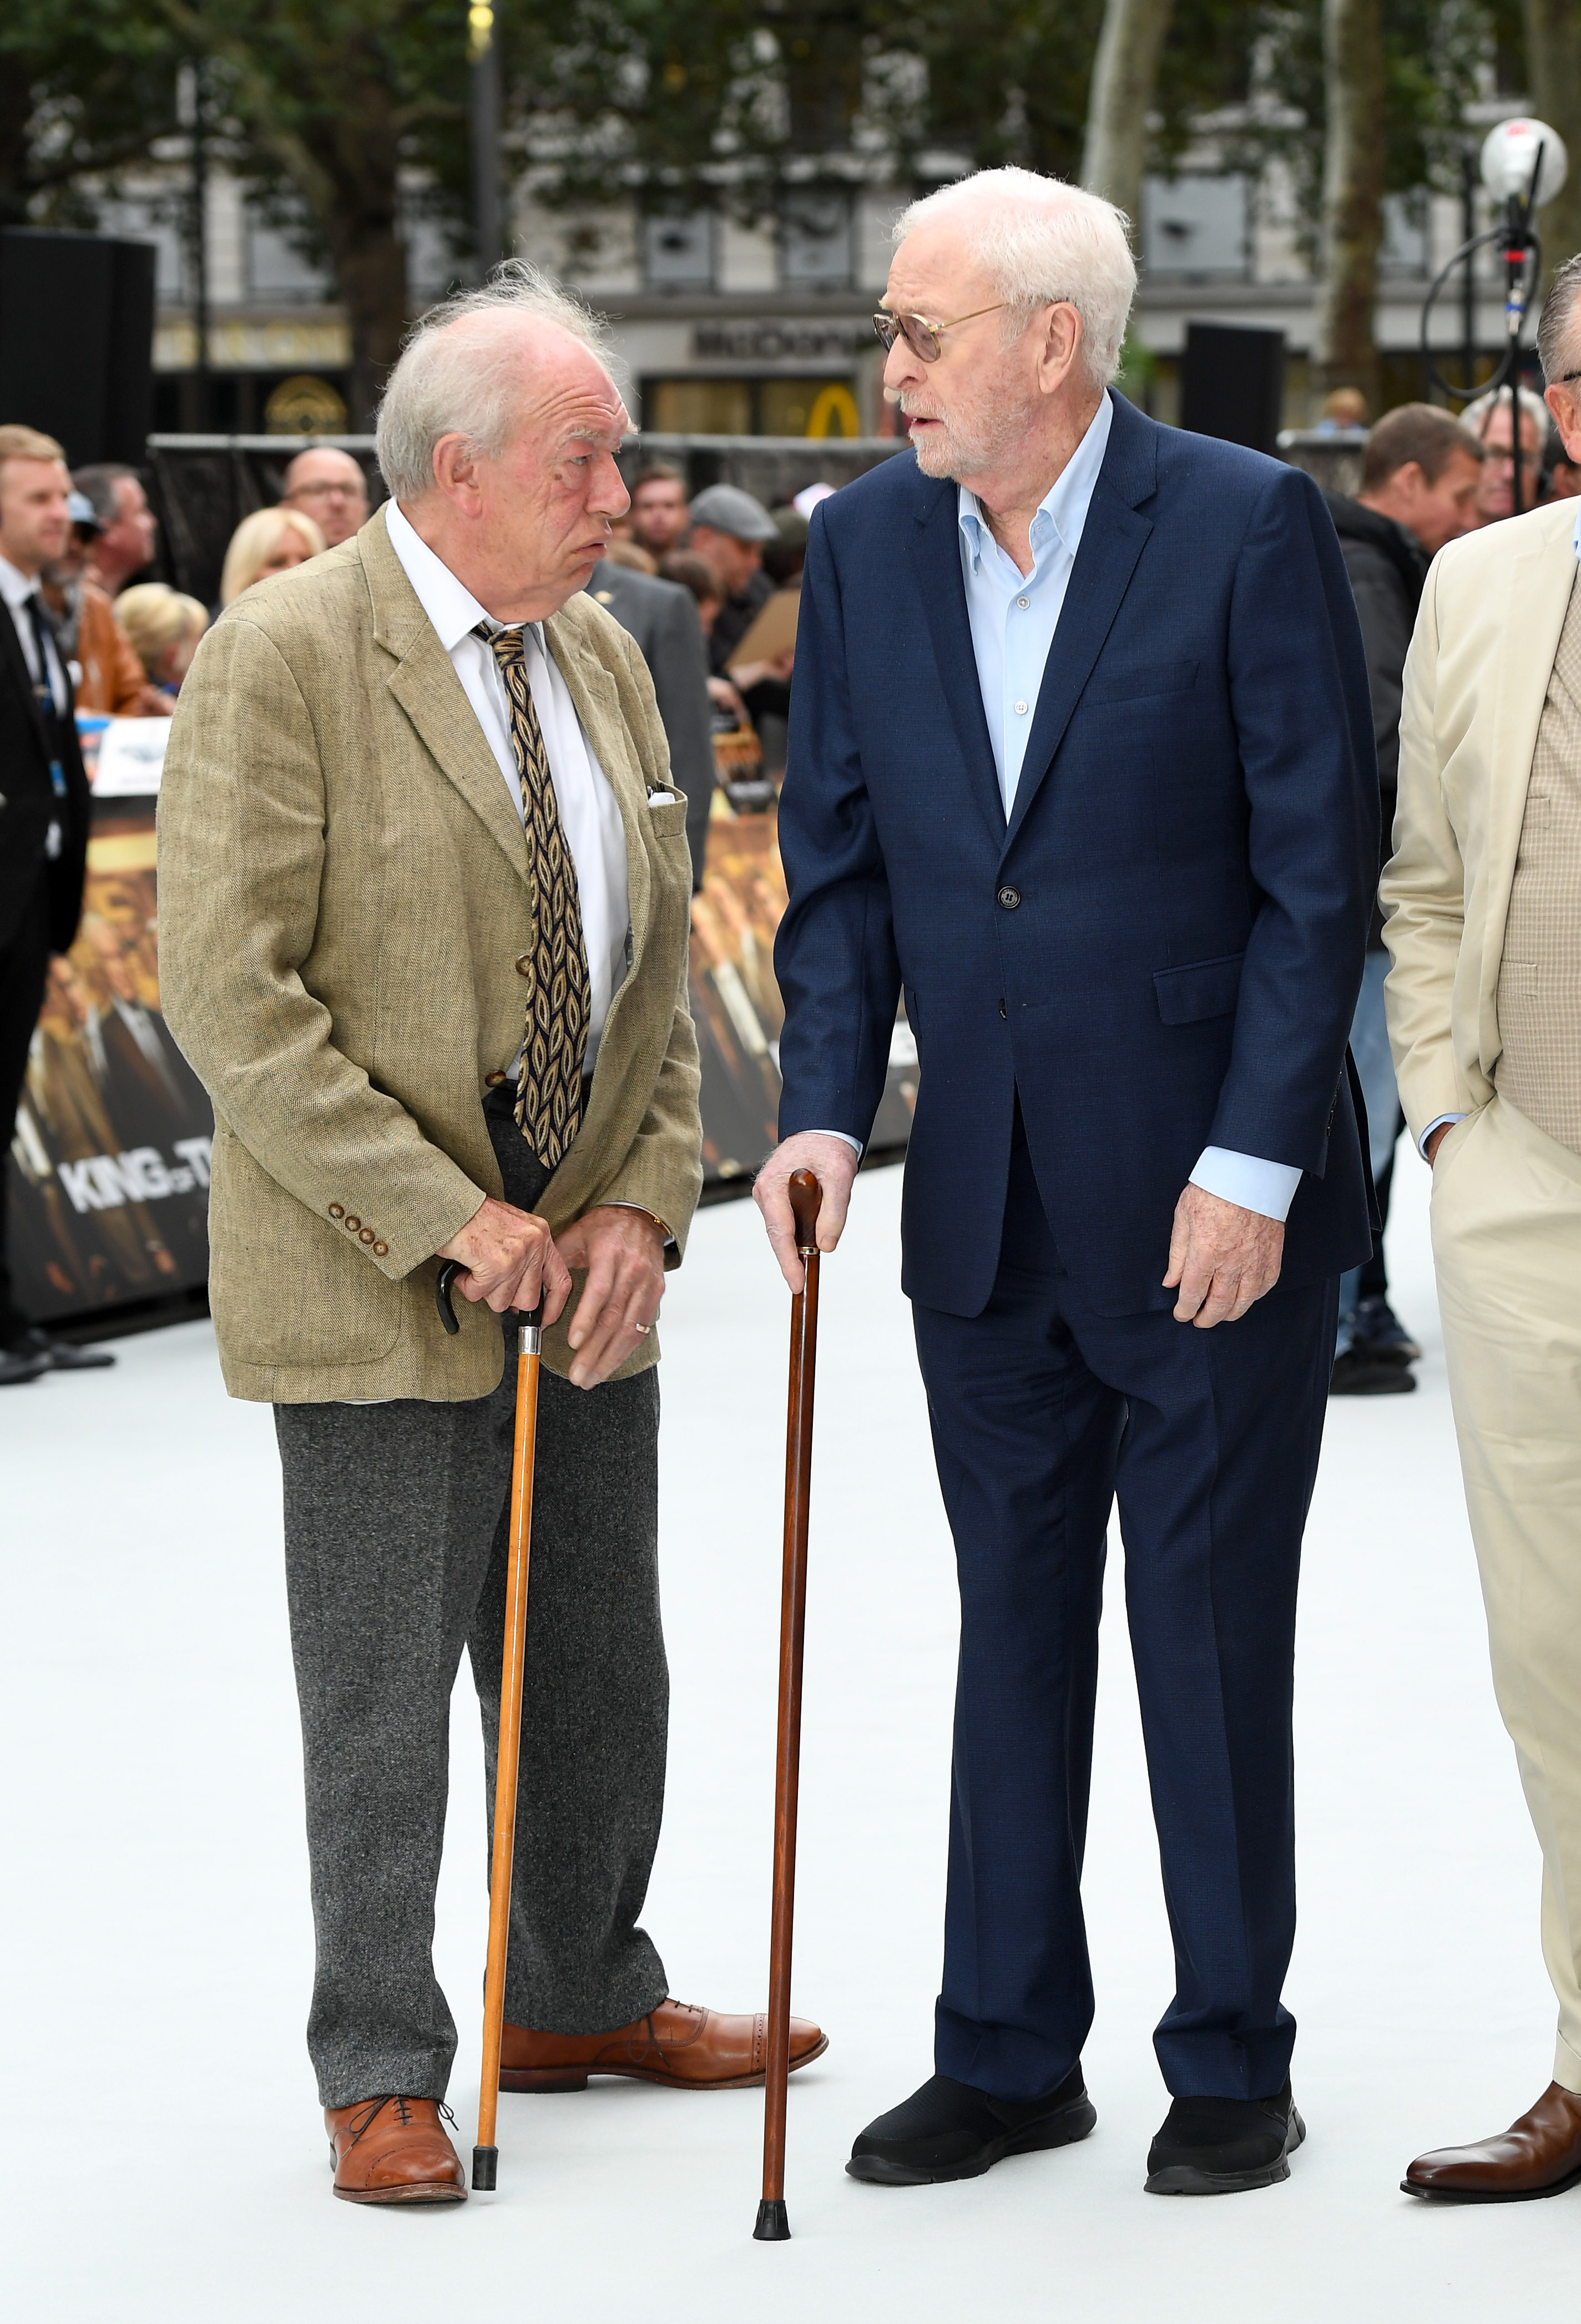 Sir Michael Caine and Sir Michael Gambon at the world premiere of "King Of Thieves" in London, England on September 12, 2018 | Source: Getty Images